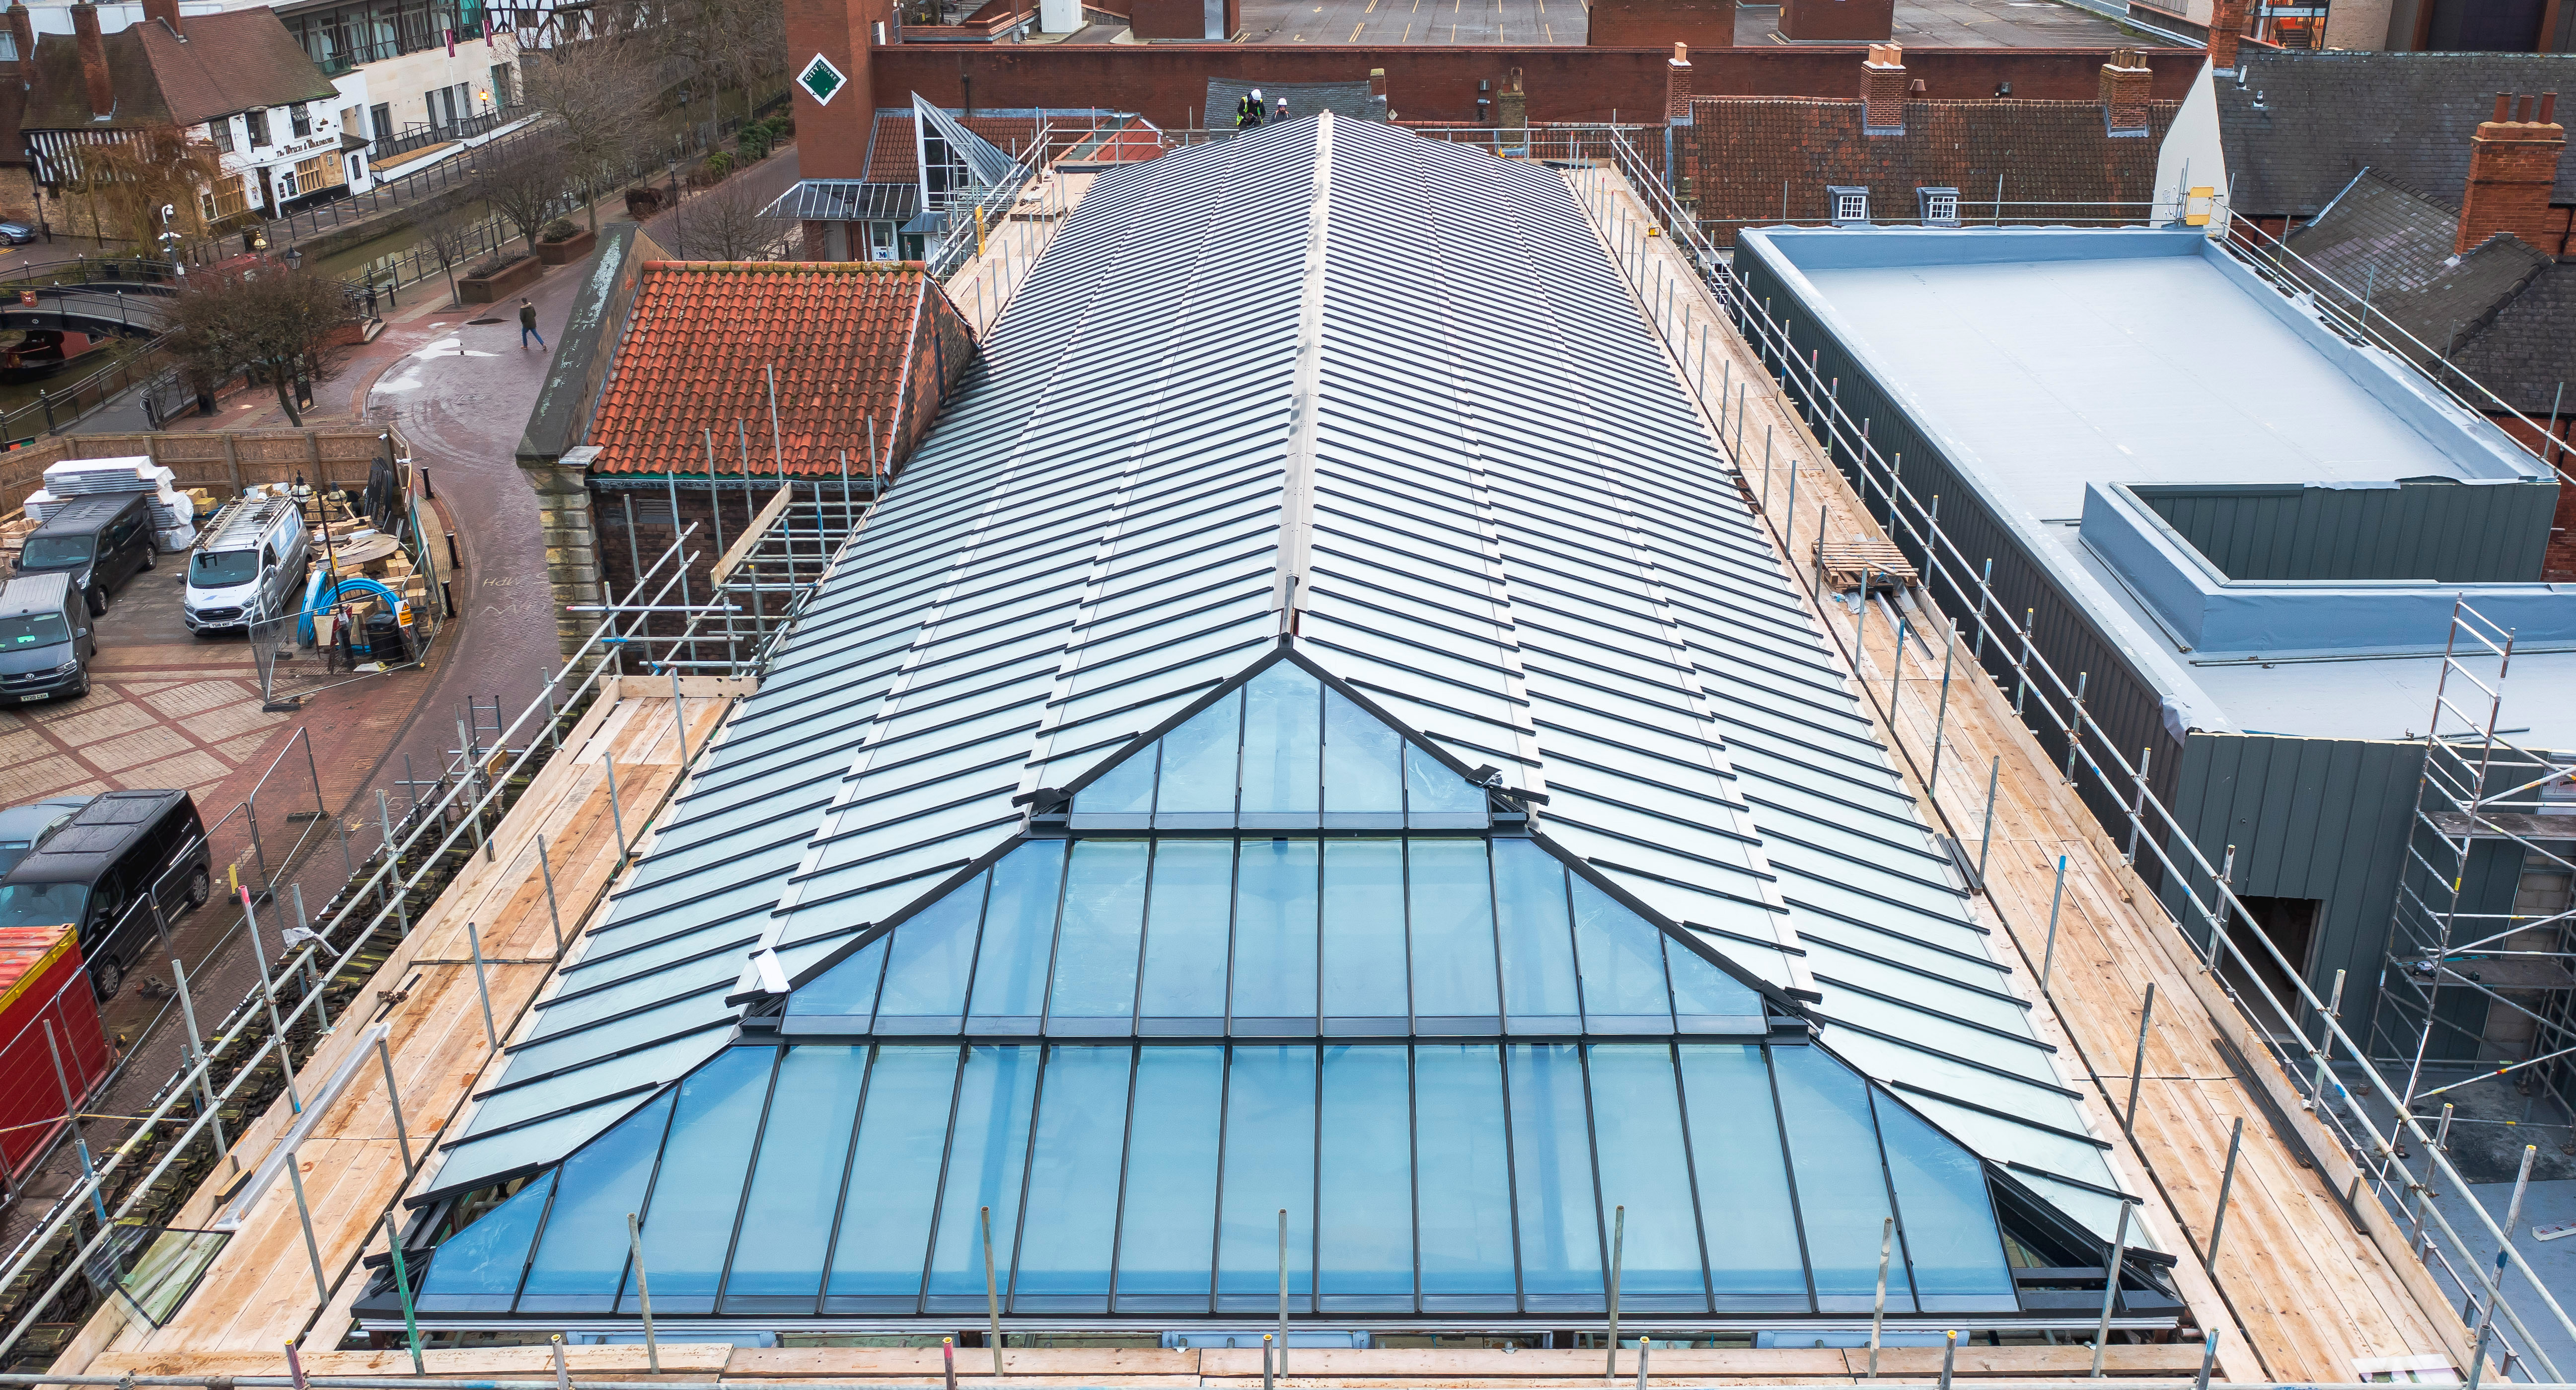 The glass roof for the building has now been completed.